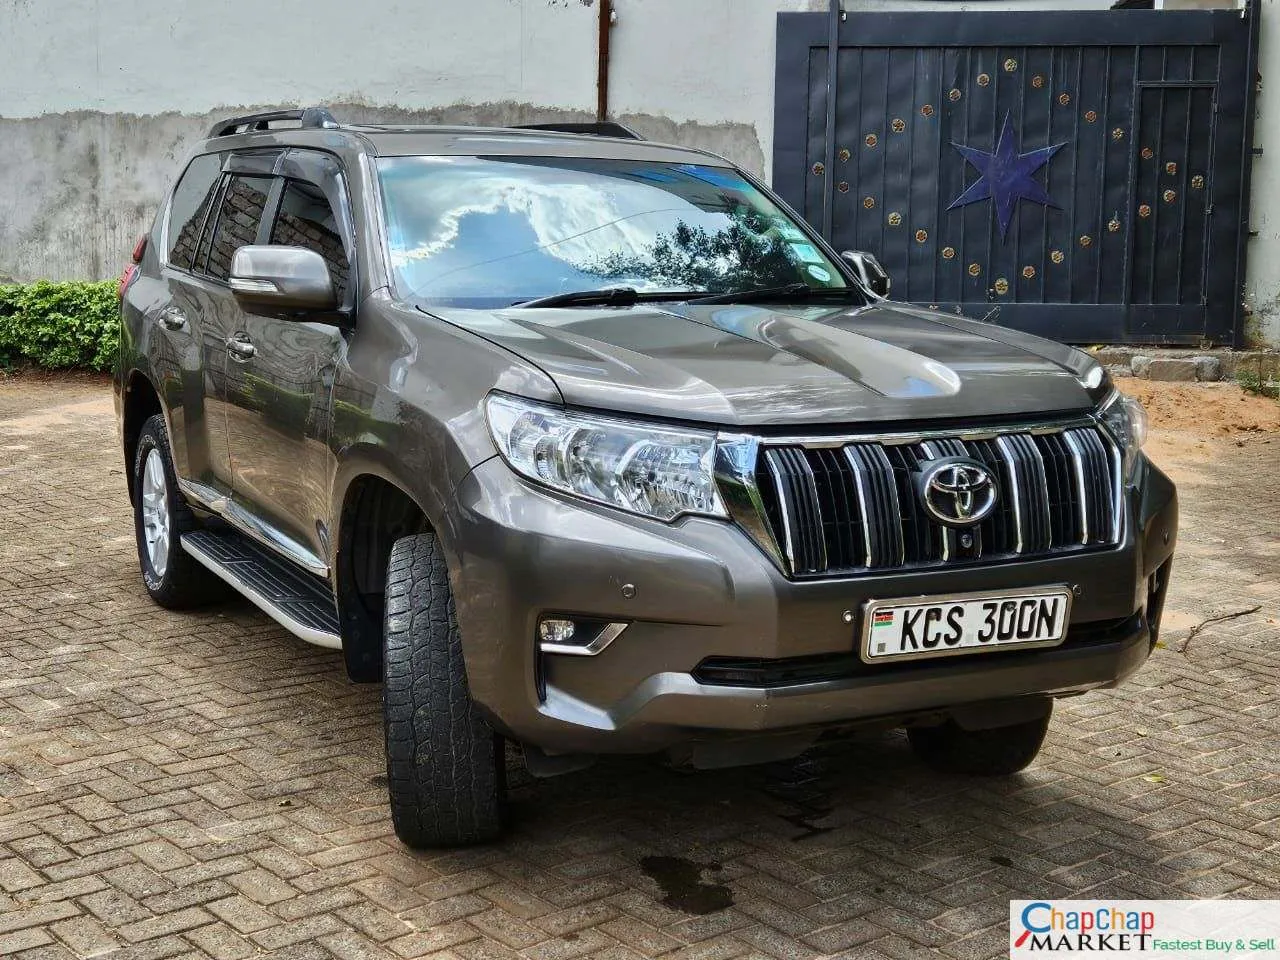 Toyota Prado VXL Fully Loaded You Pay 40% Deposit Trade in OK New for sale in Kenya hire purchase installments